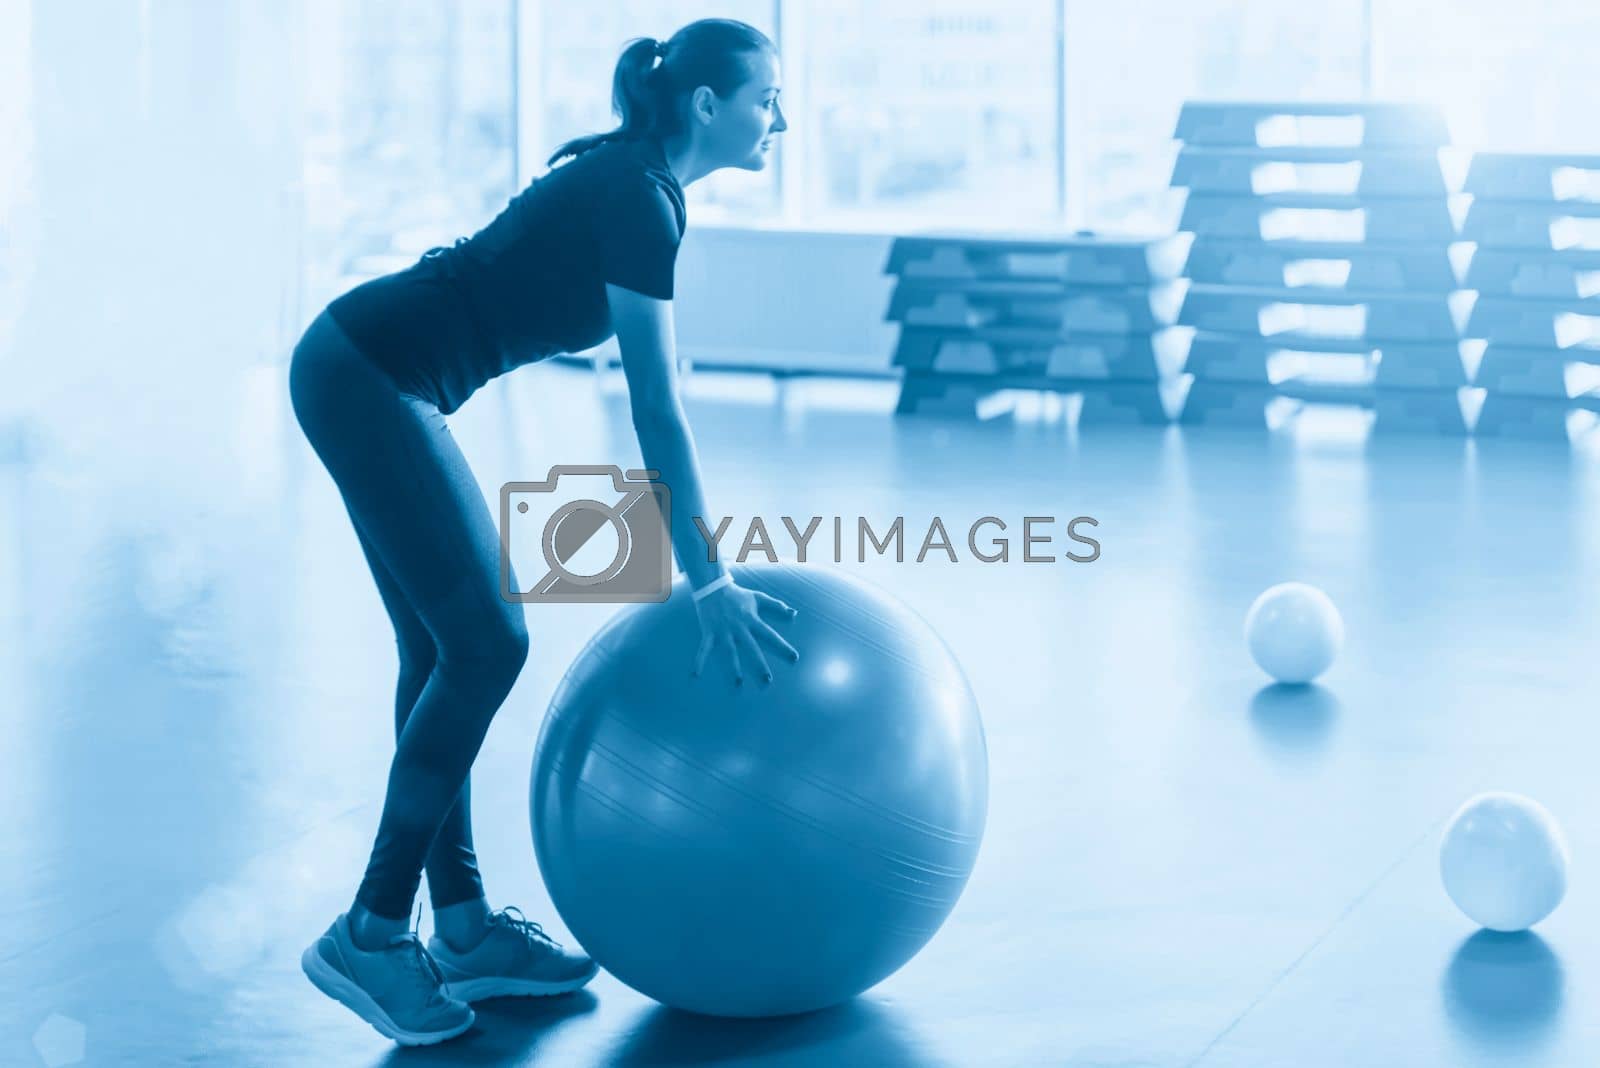 Royalty free image of Woman at the gym doing exercises with pilates ball by Mariakray